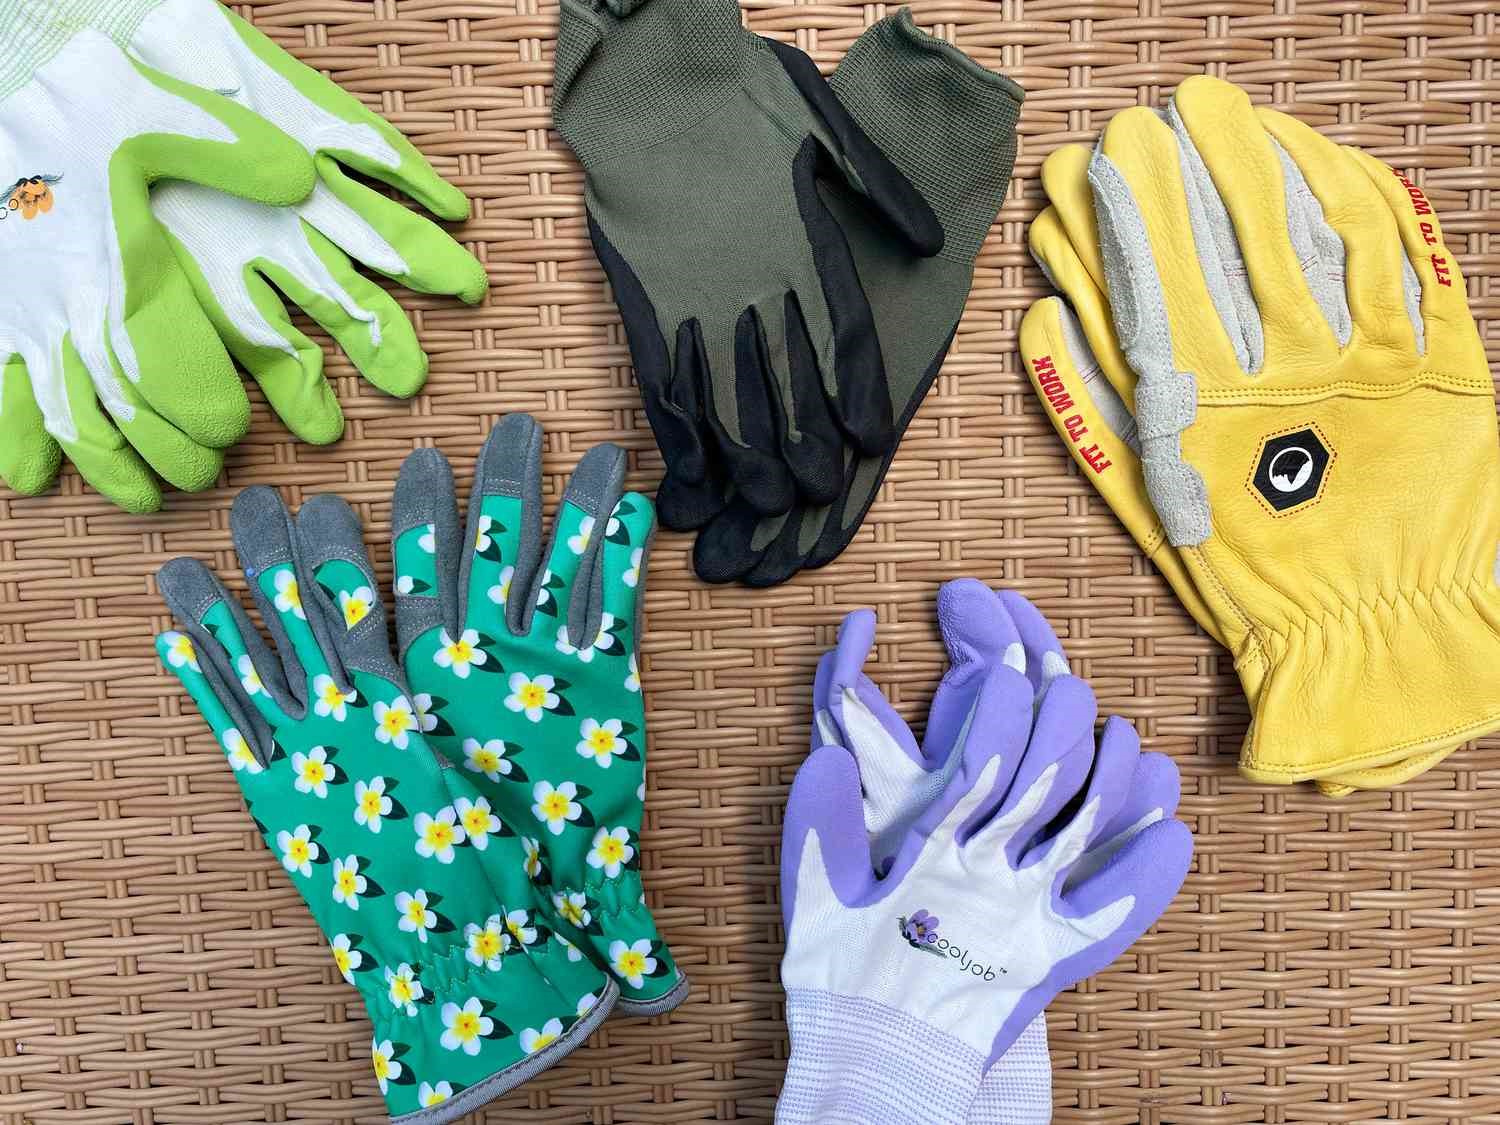 Choosing the Right Garden Gloves for Your Needs